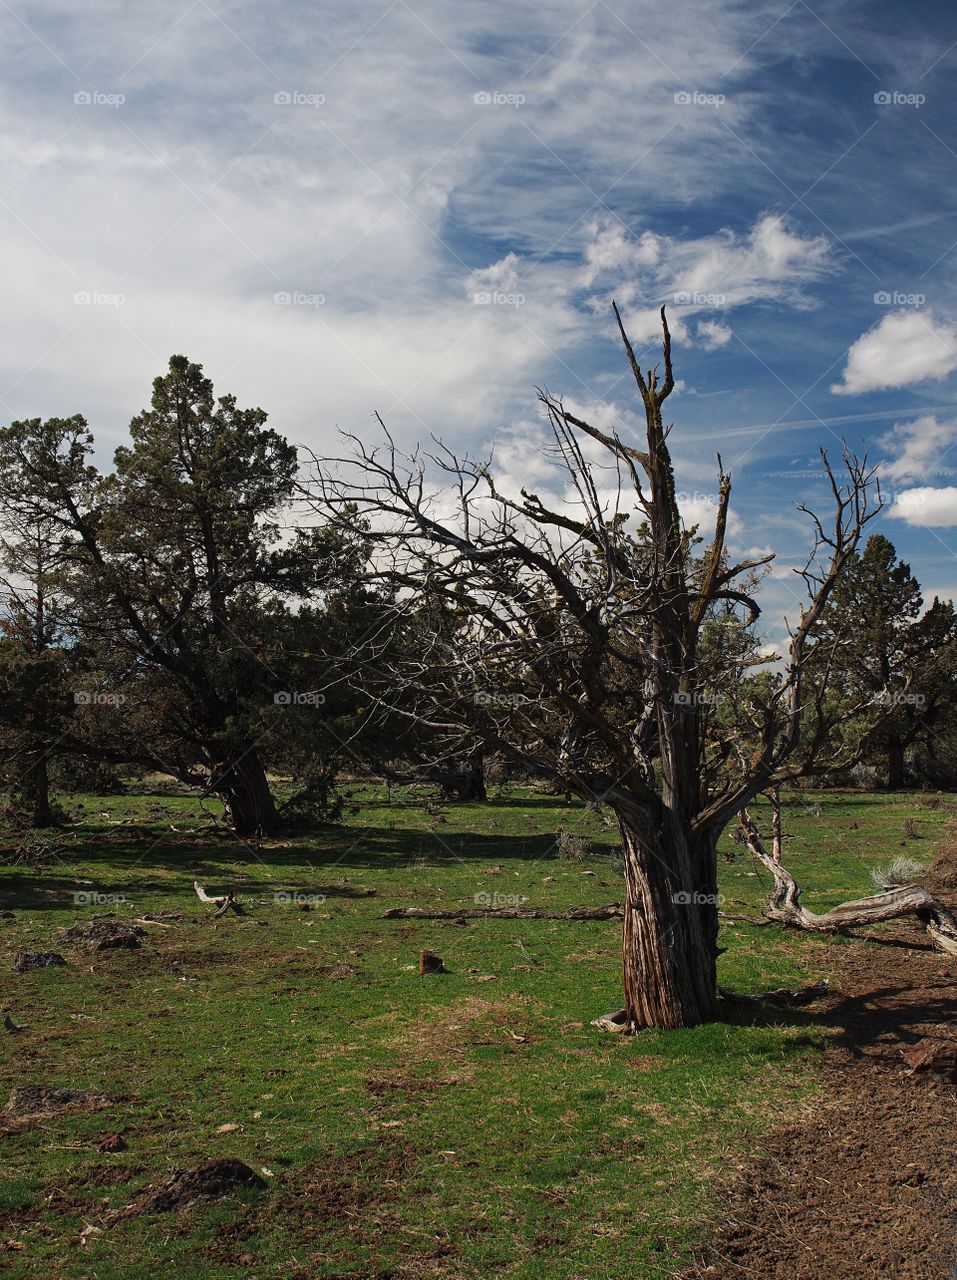 An old and thick juniper tree with bare branches in the spring with green grass and blue skies in a field on a backroad in rural Central Oregon. 